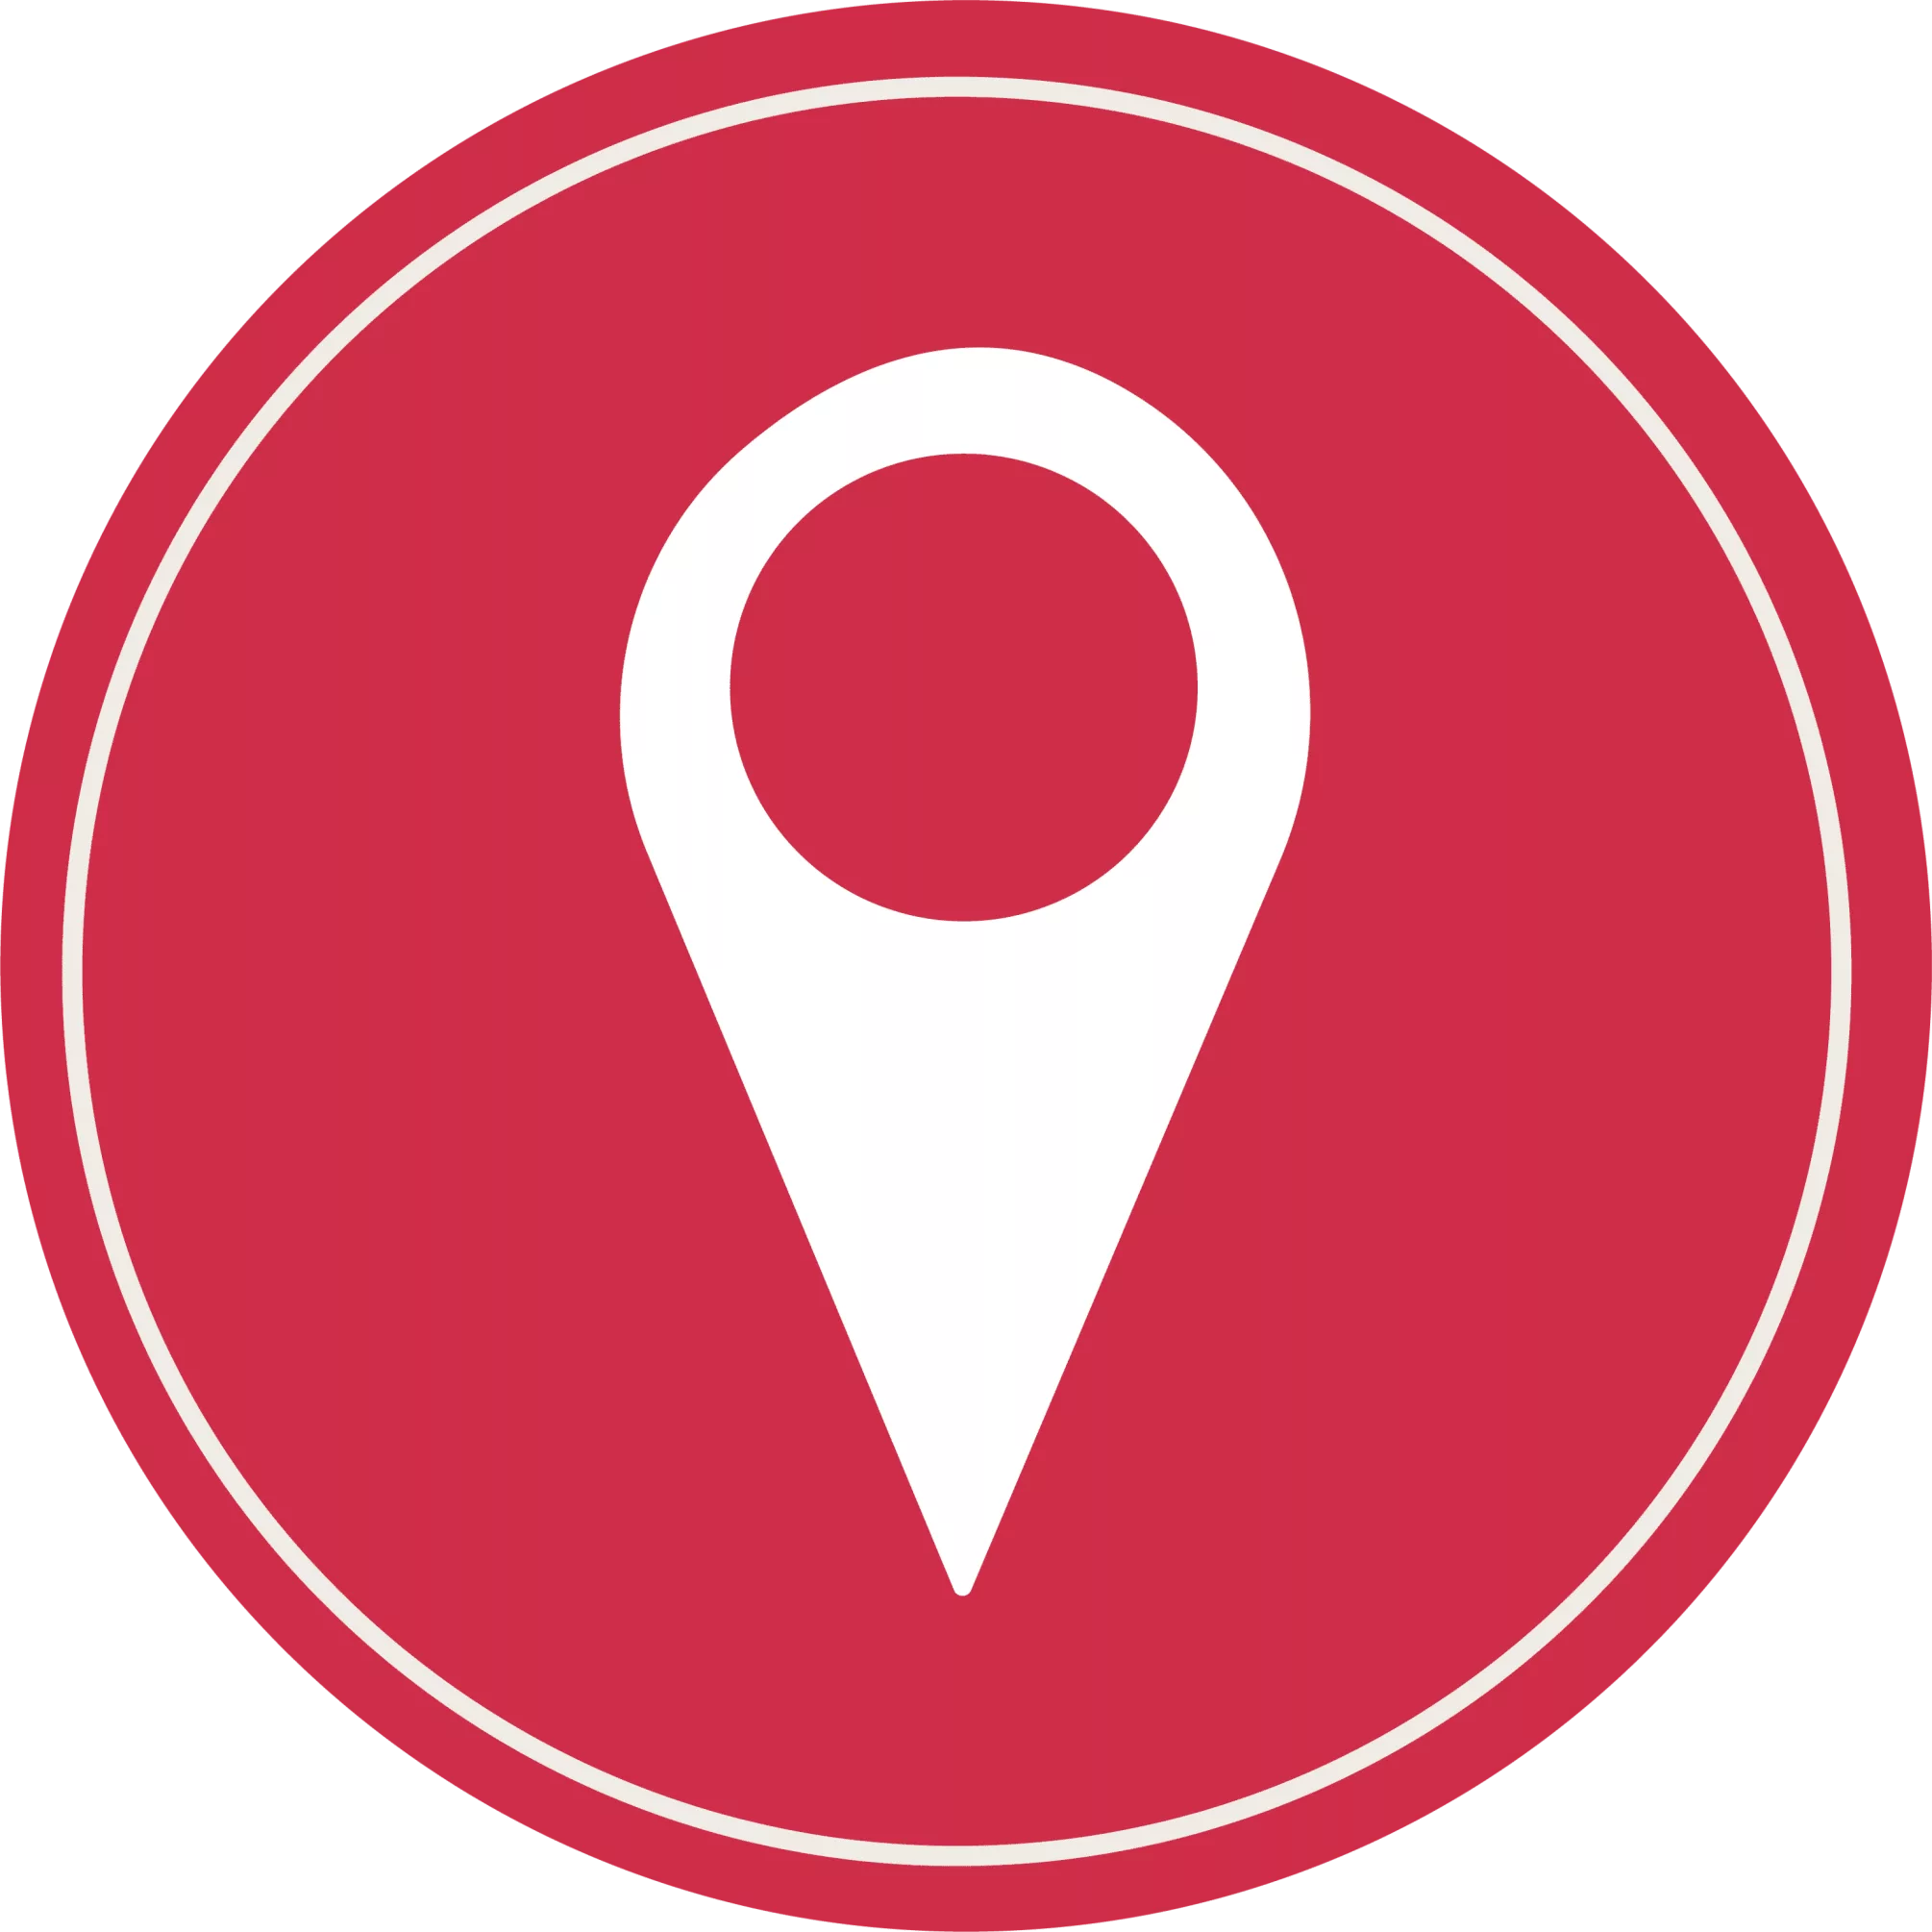 A white location pin icon in a red circle, symbolizing adventure.